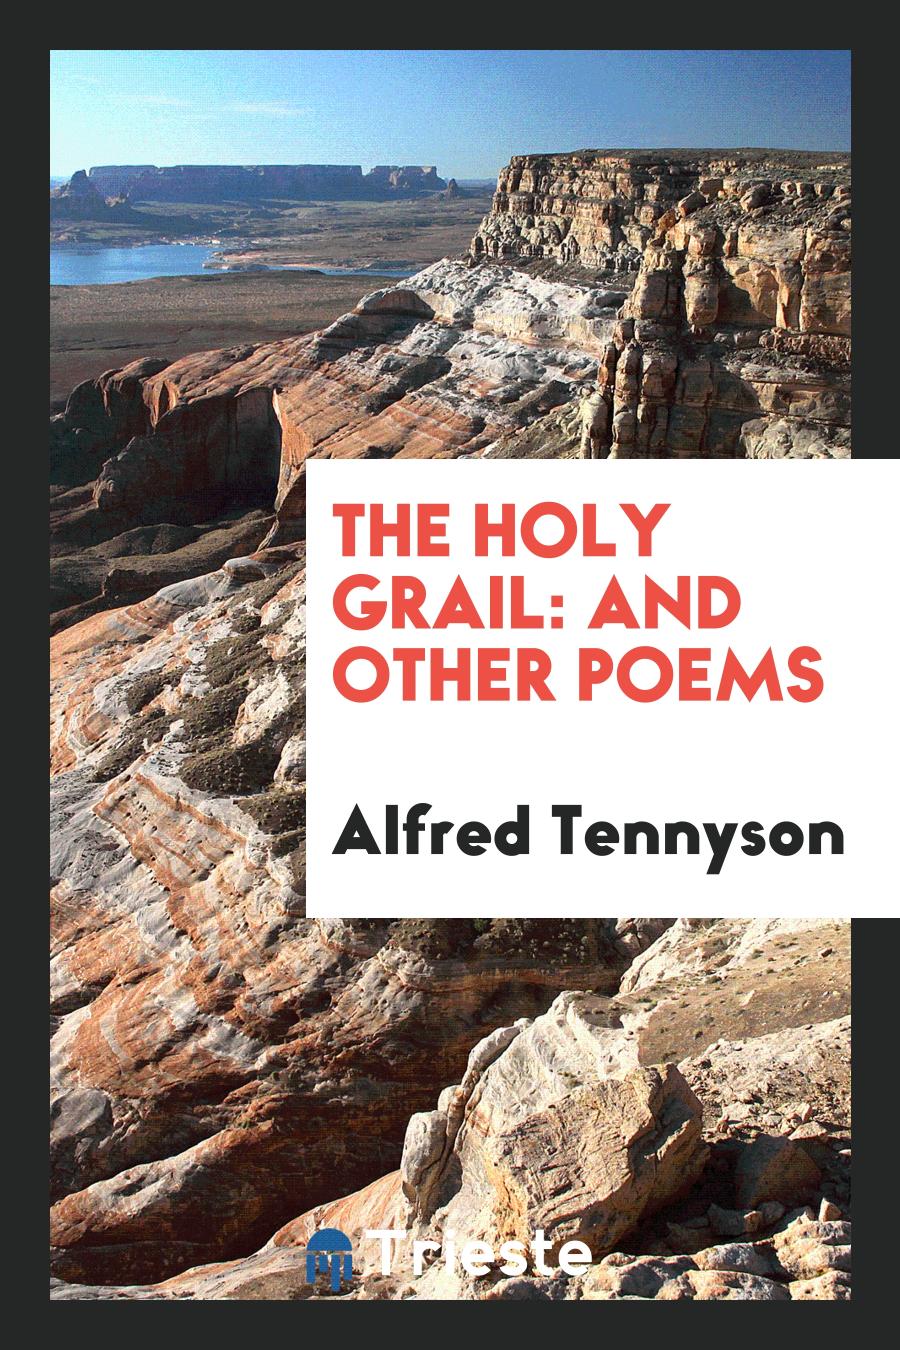 The Holy Grail: And Other Poems